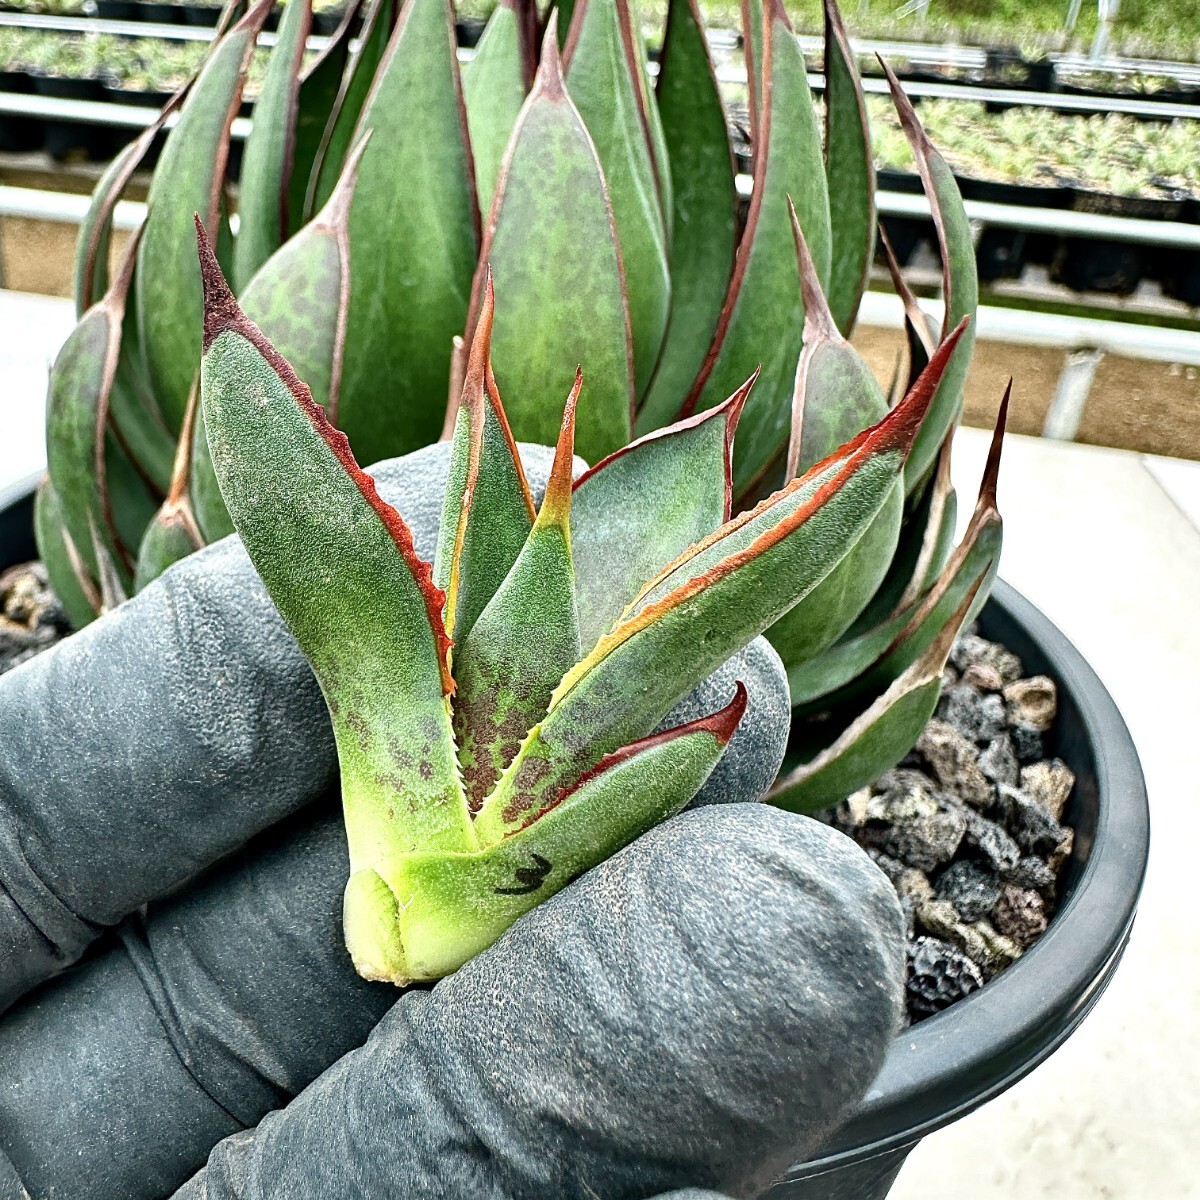 [Lj_plants]Z38 agave Mangave Praying Hands/ manga be. ... hand /Ultra Rare limitation stock beautiful stock. imported goods. carefuly selected finest quality . stock 2 stock including in a package .